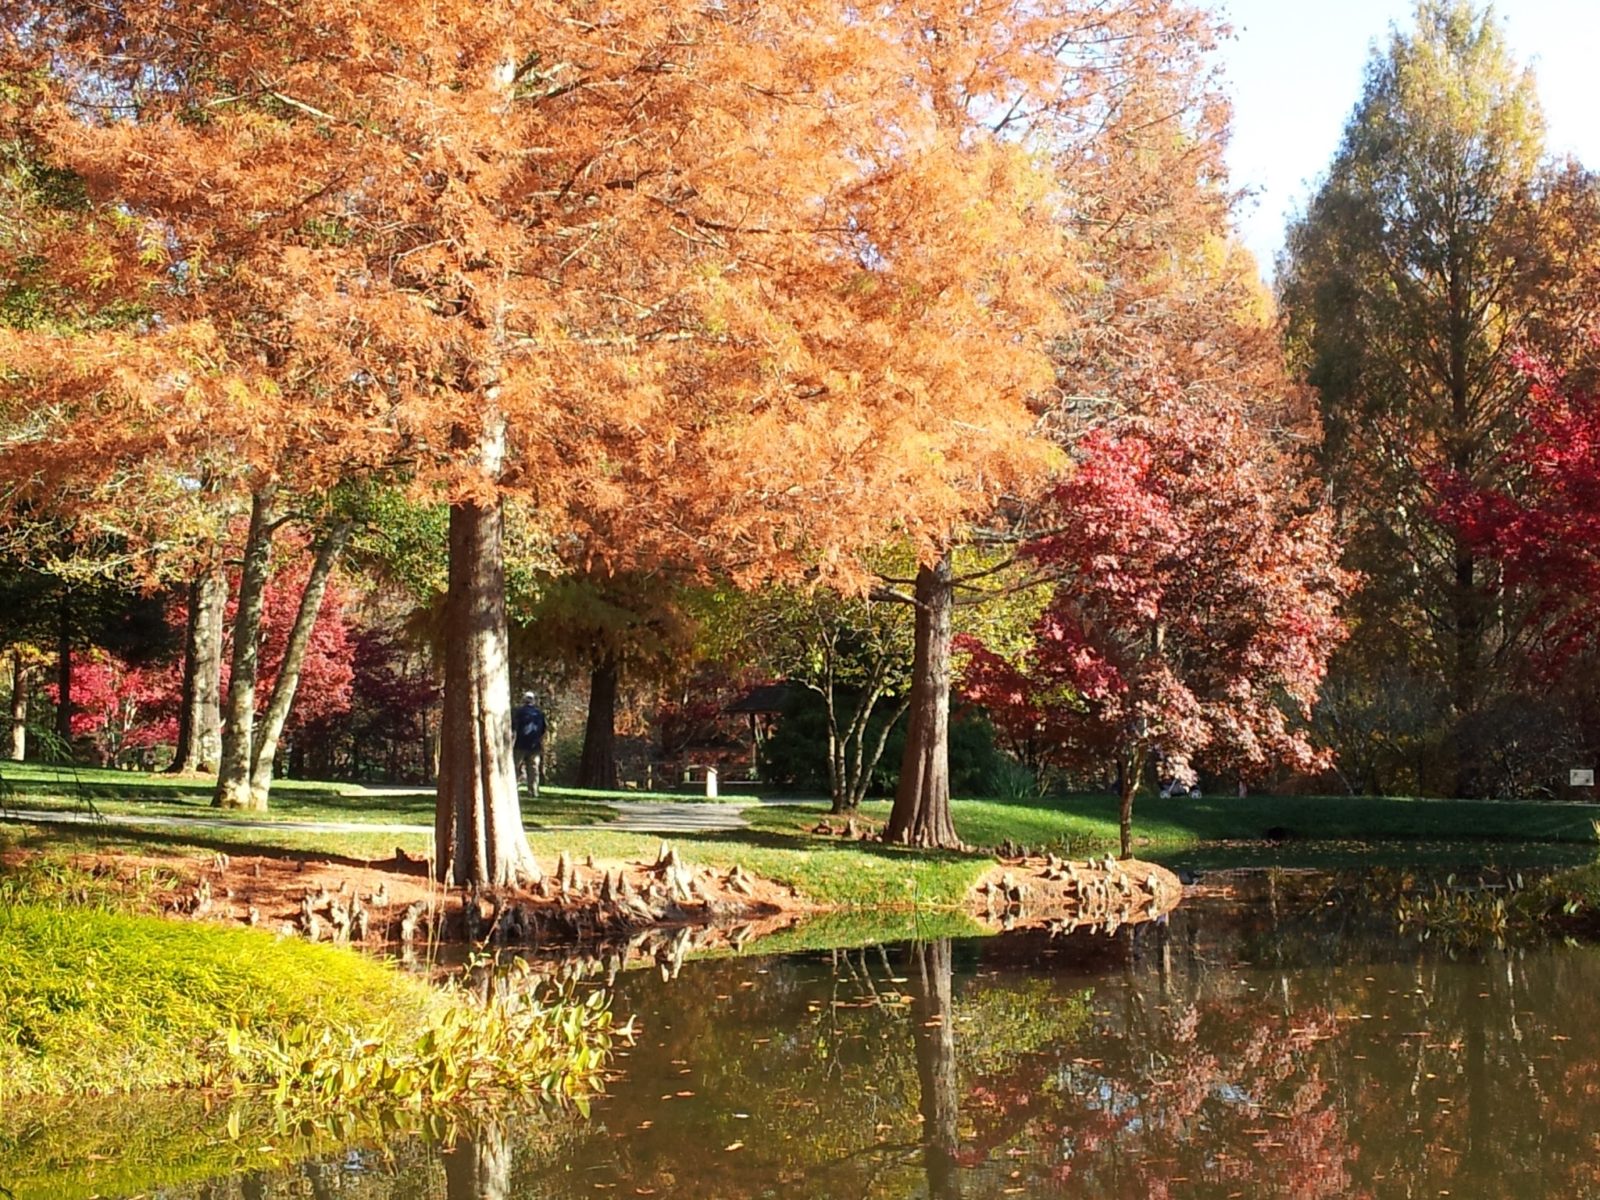 Trees in autumn colors by a pond